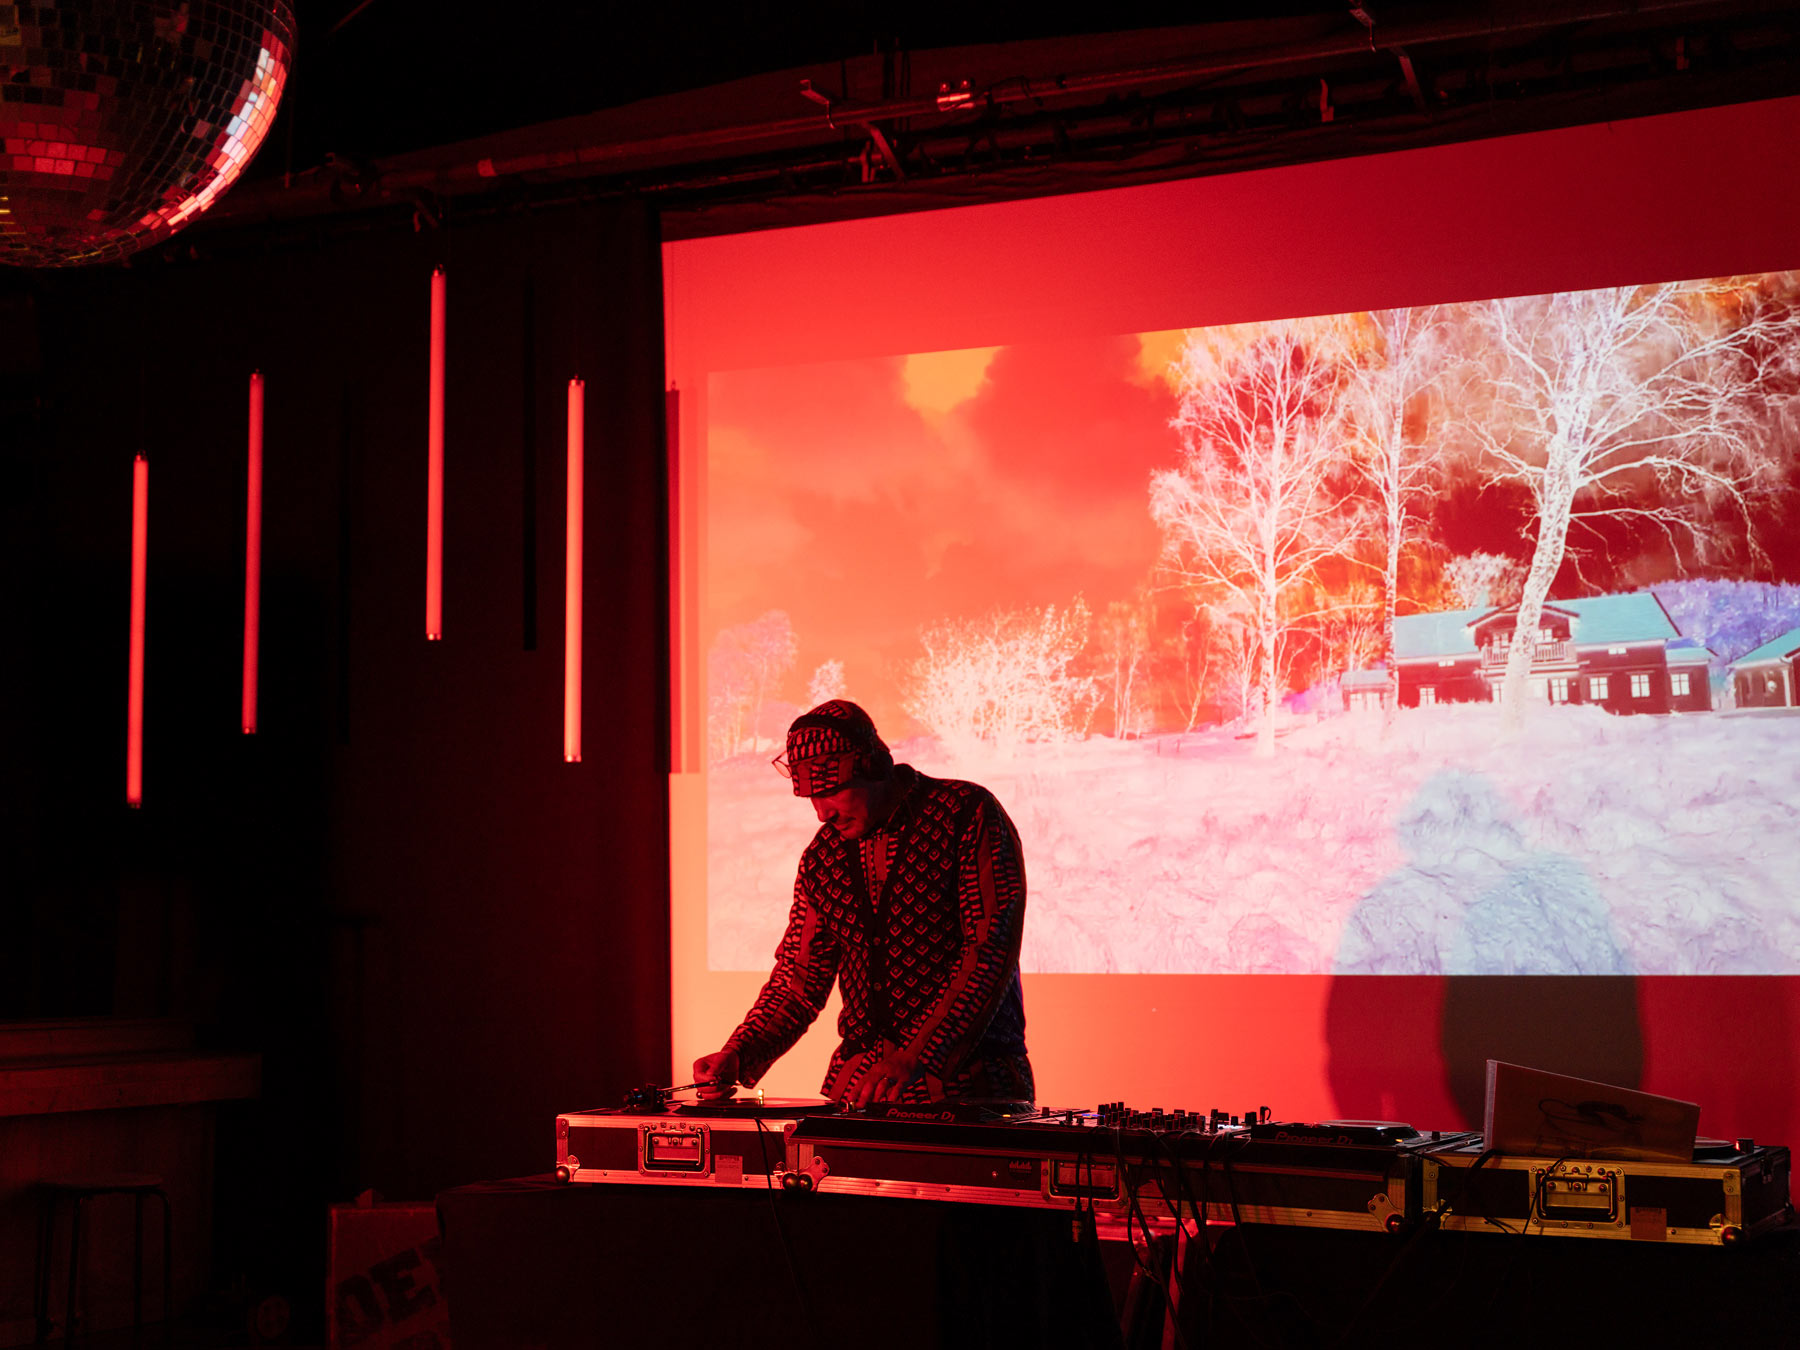 DJ in front of his decks and an image of a house in the snow